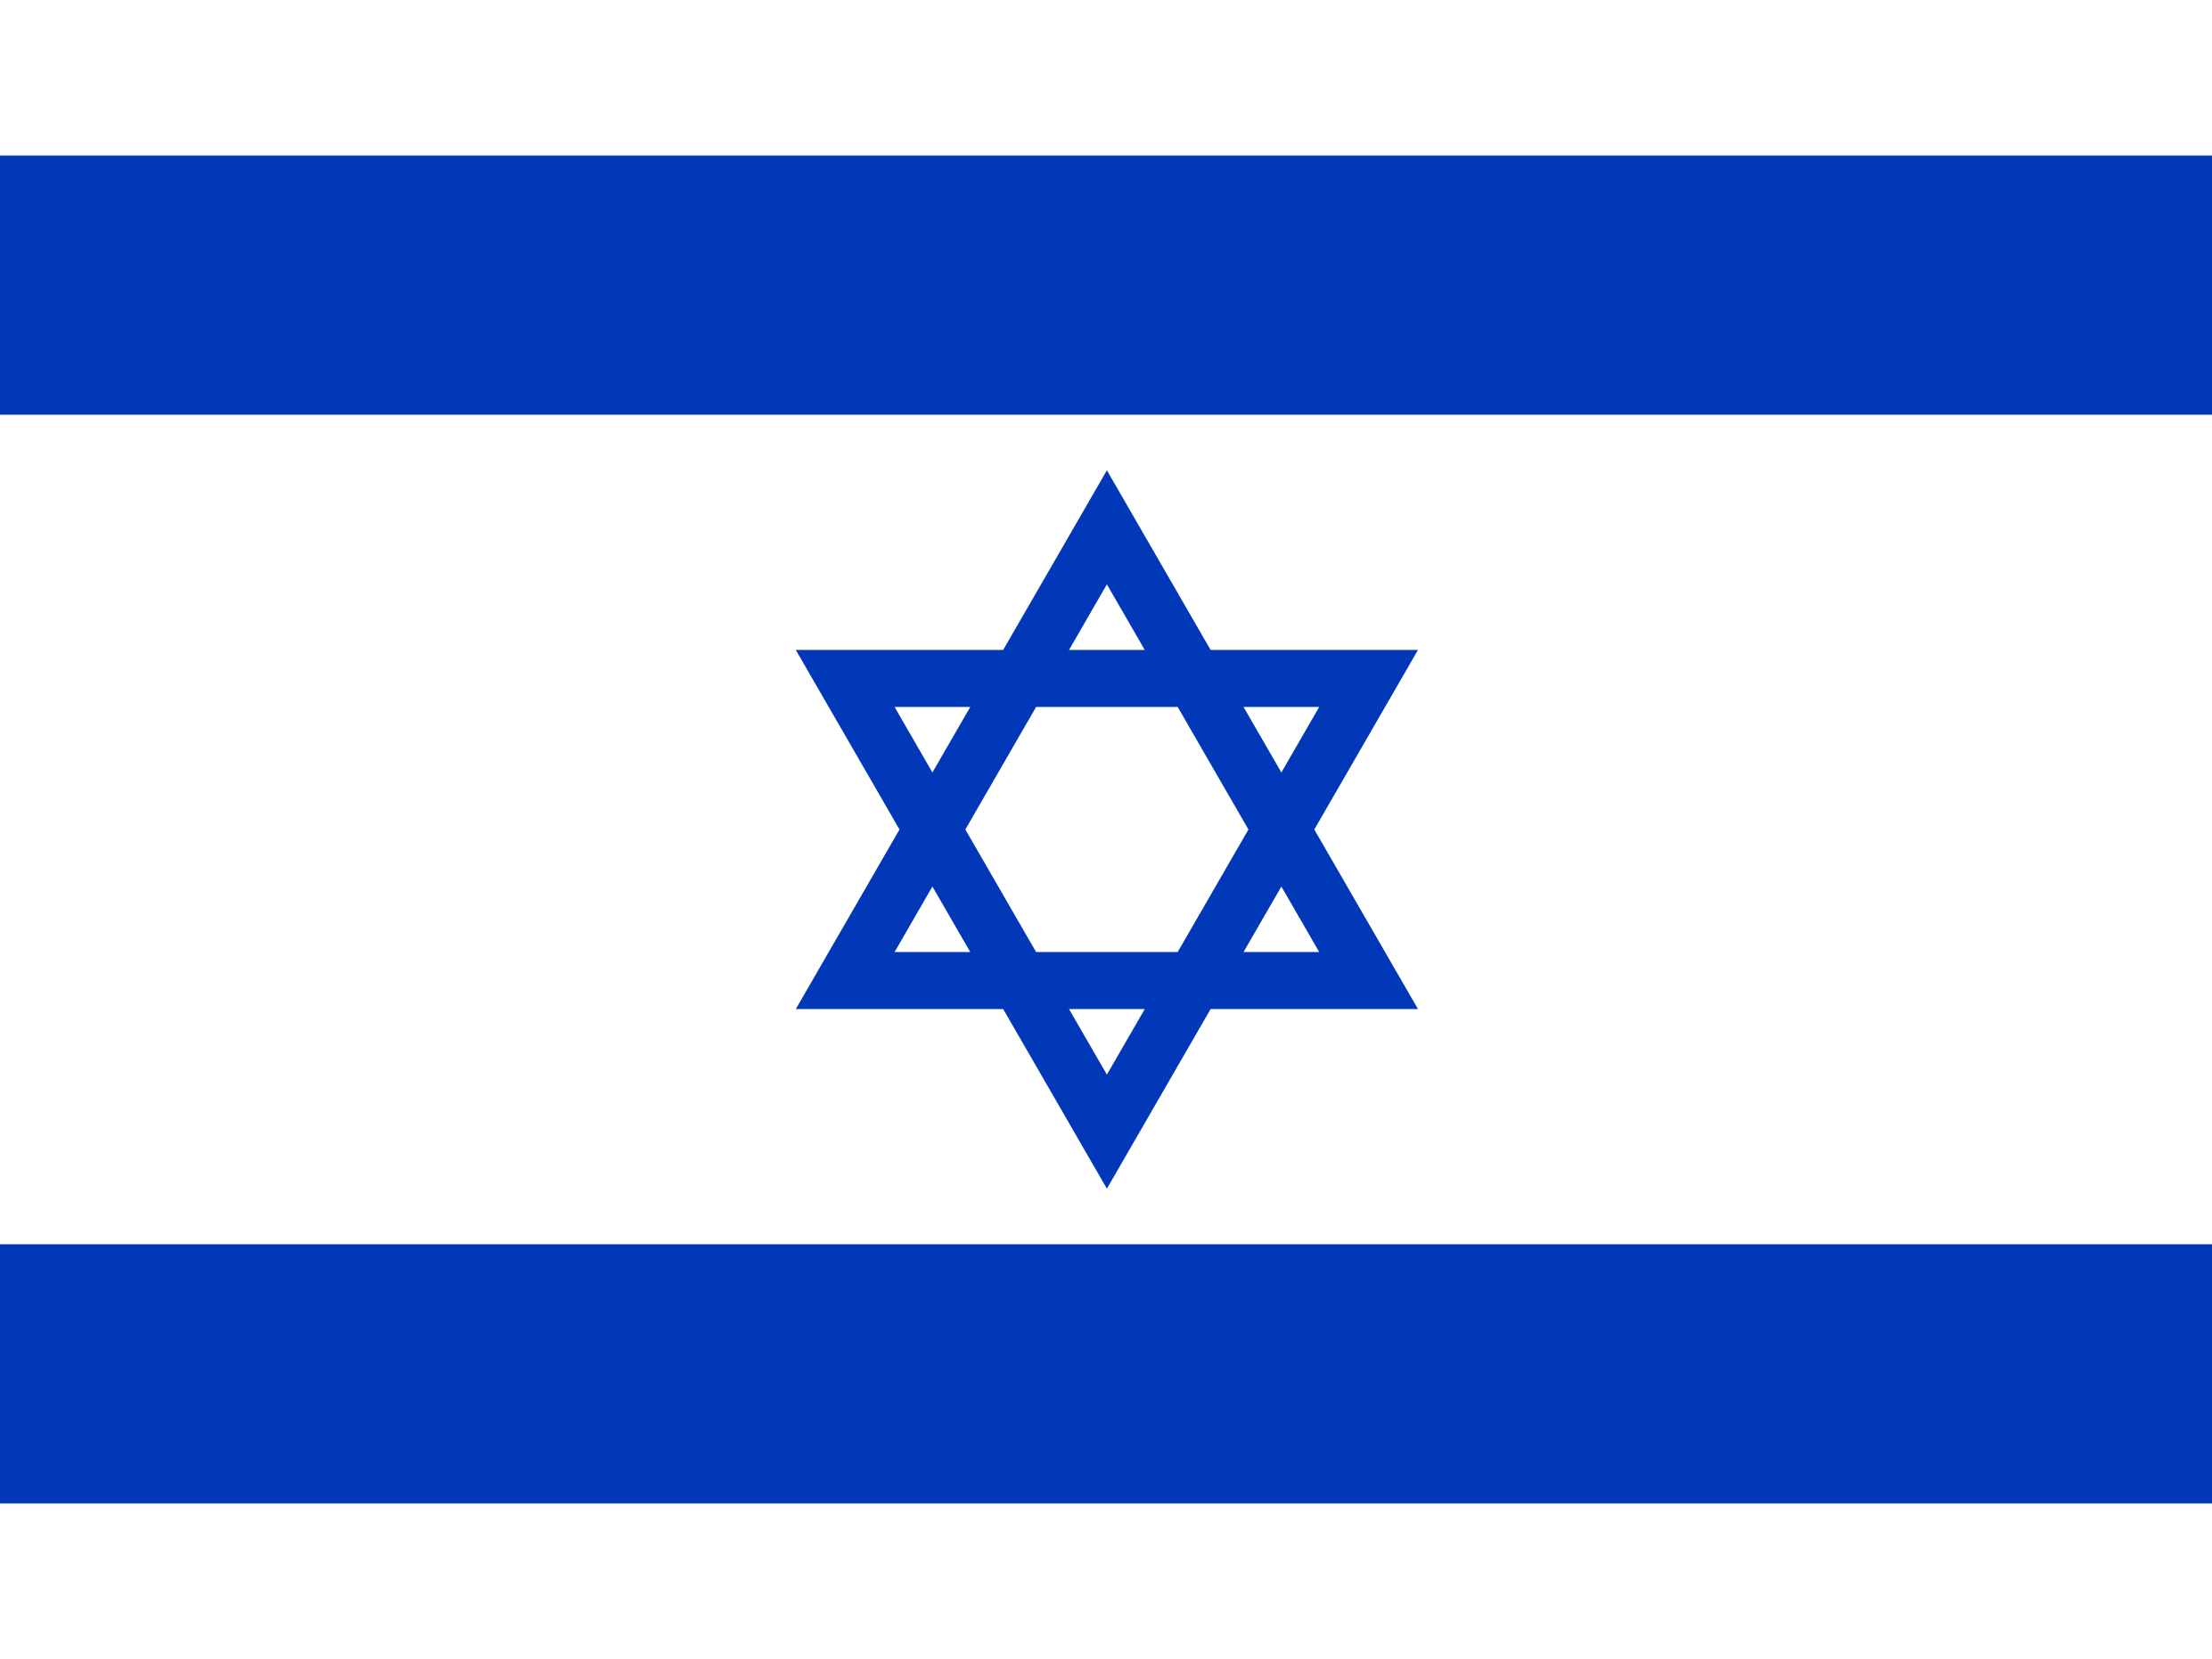 Solidarity with Israel